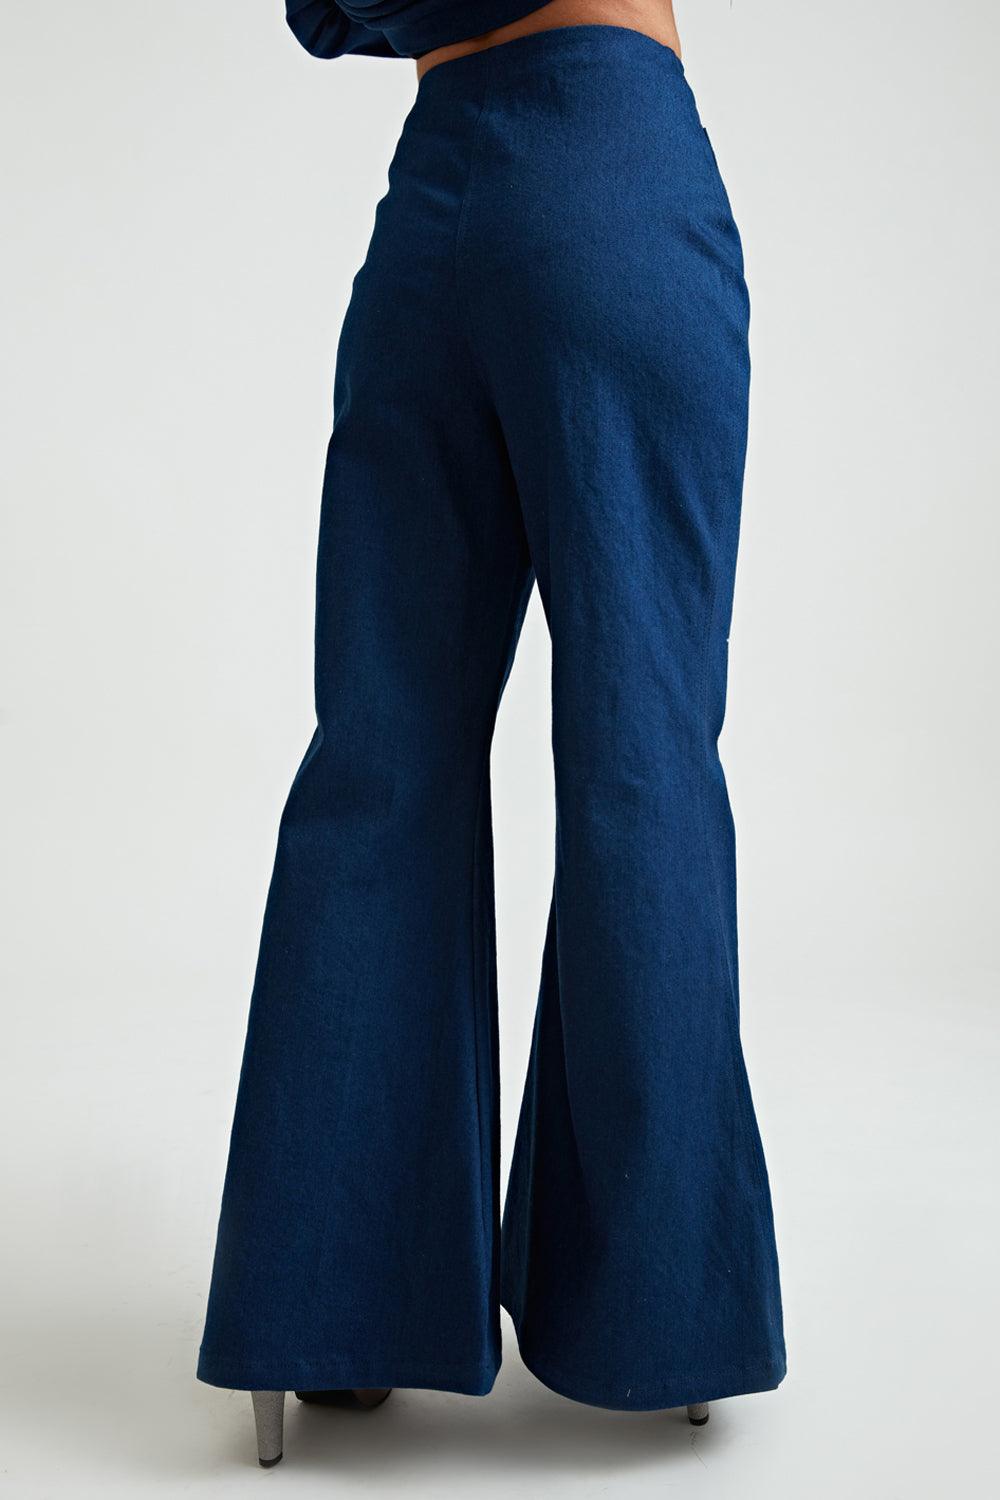 Blue Swan Co-ord Trousers - ANI CLOTHING